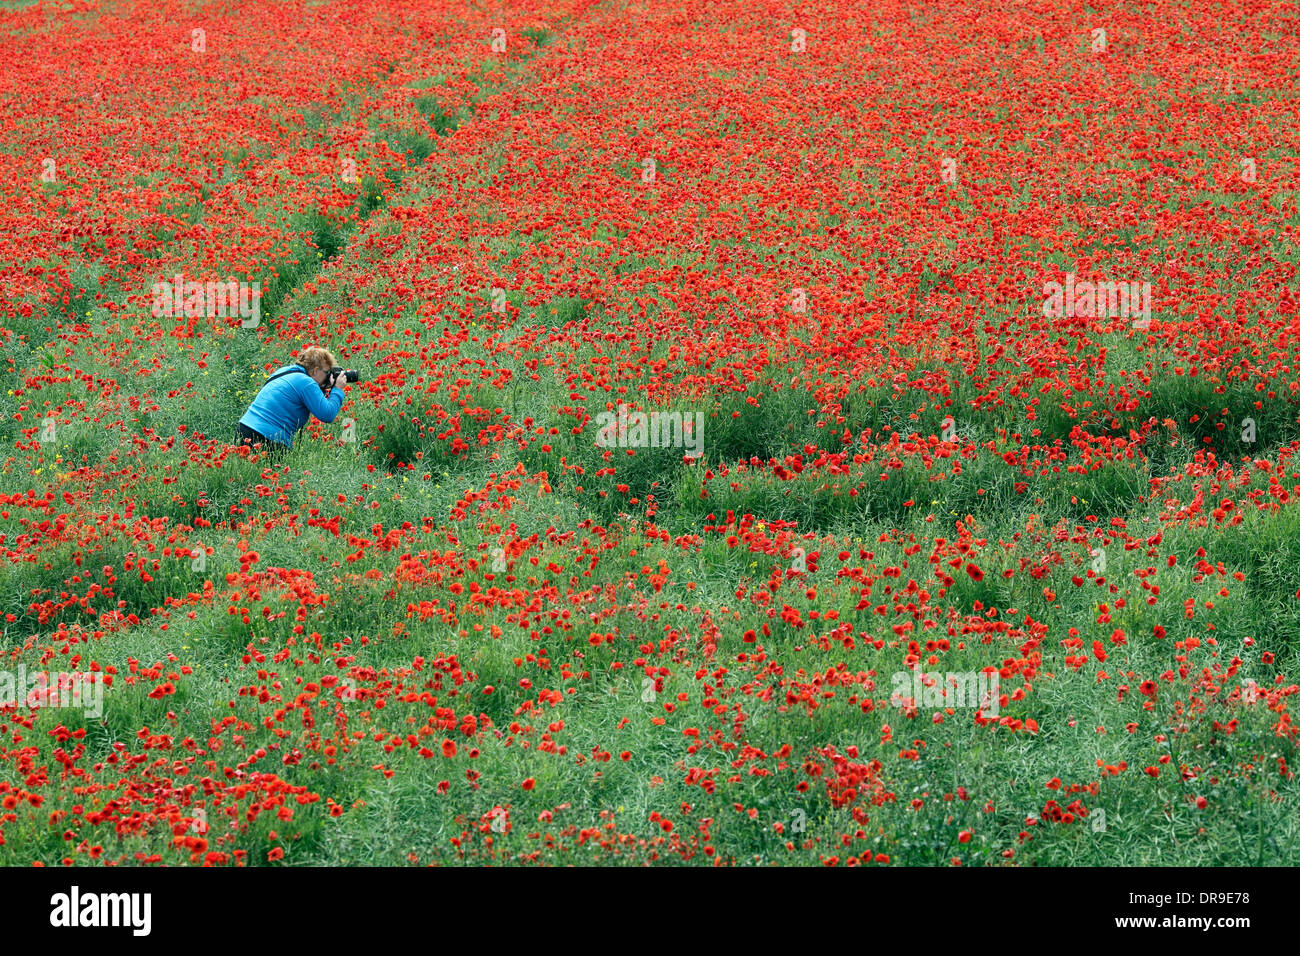 Woman photographing poppies which have invaded a field of rapeseed growing near Brighton. Stock Photo